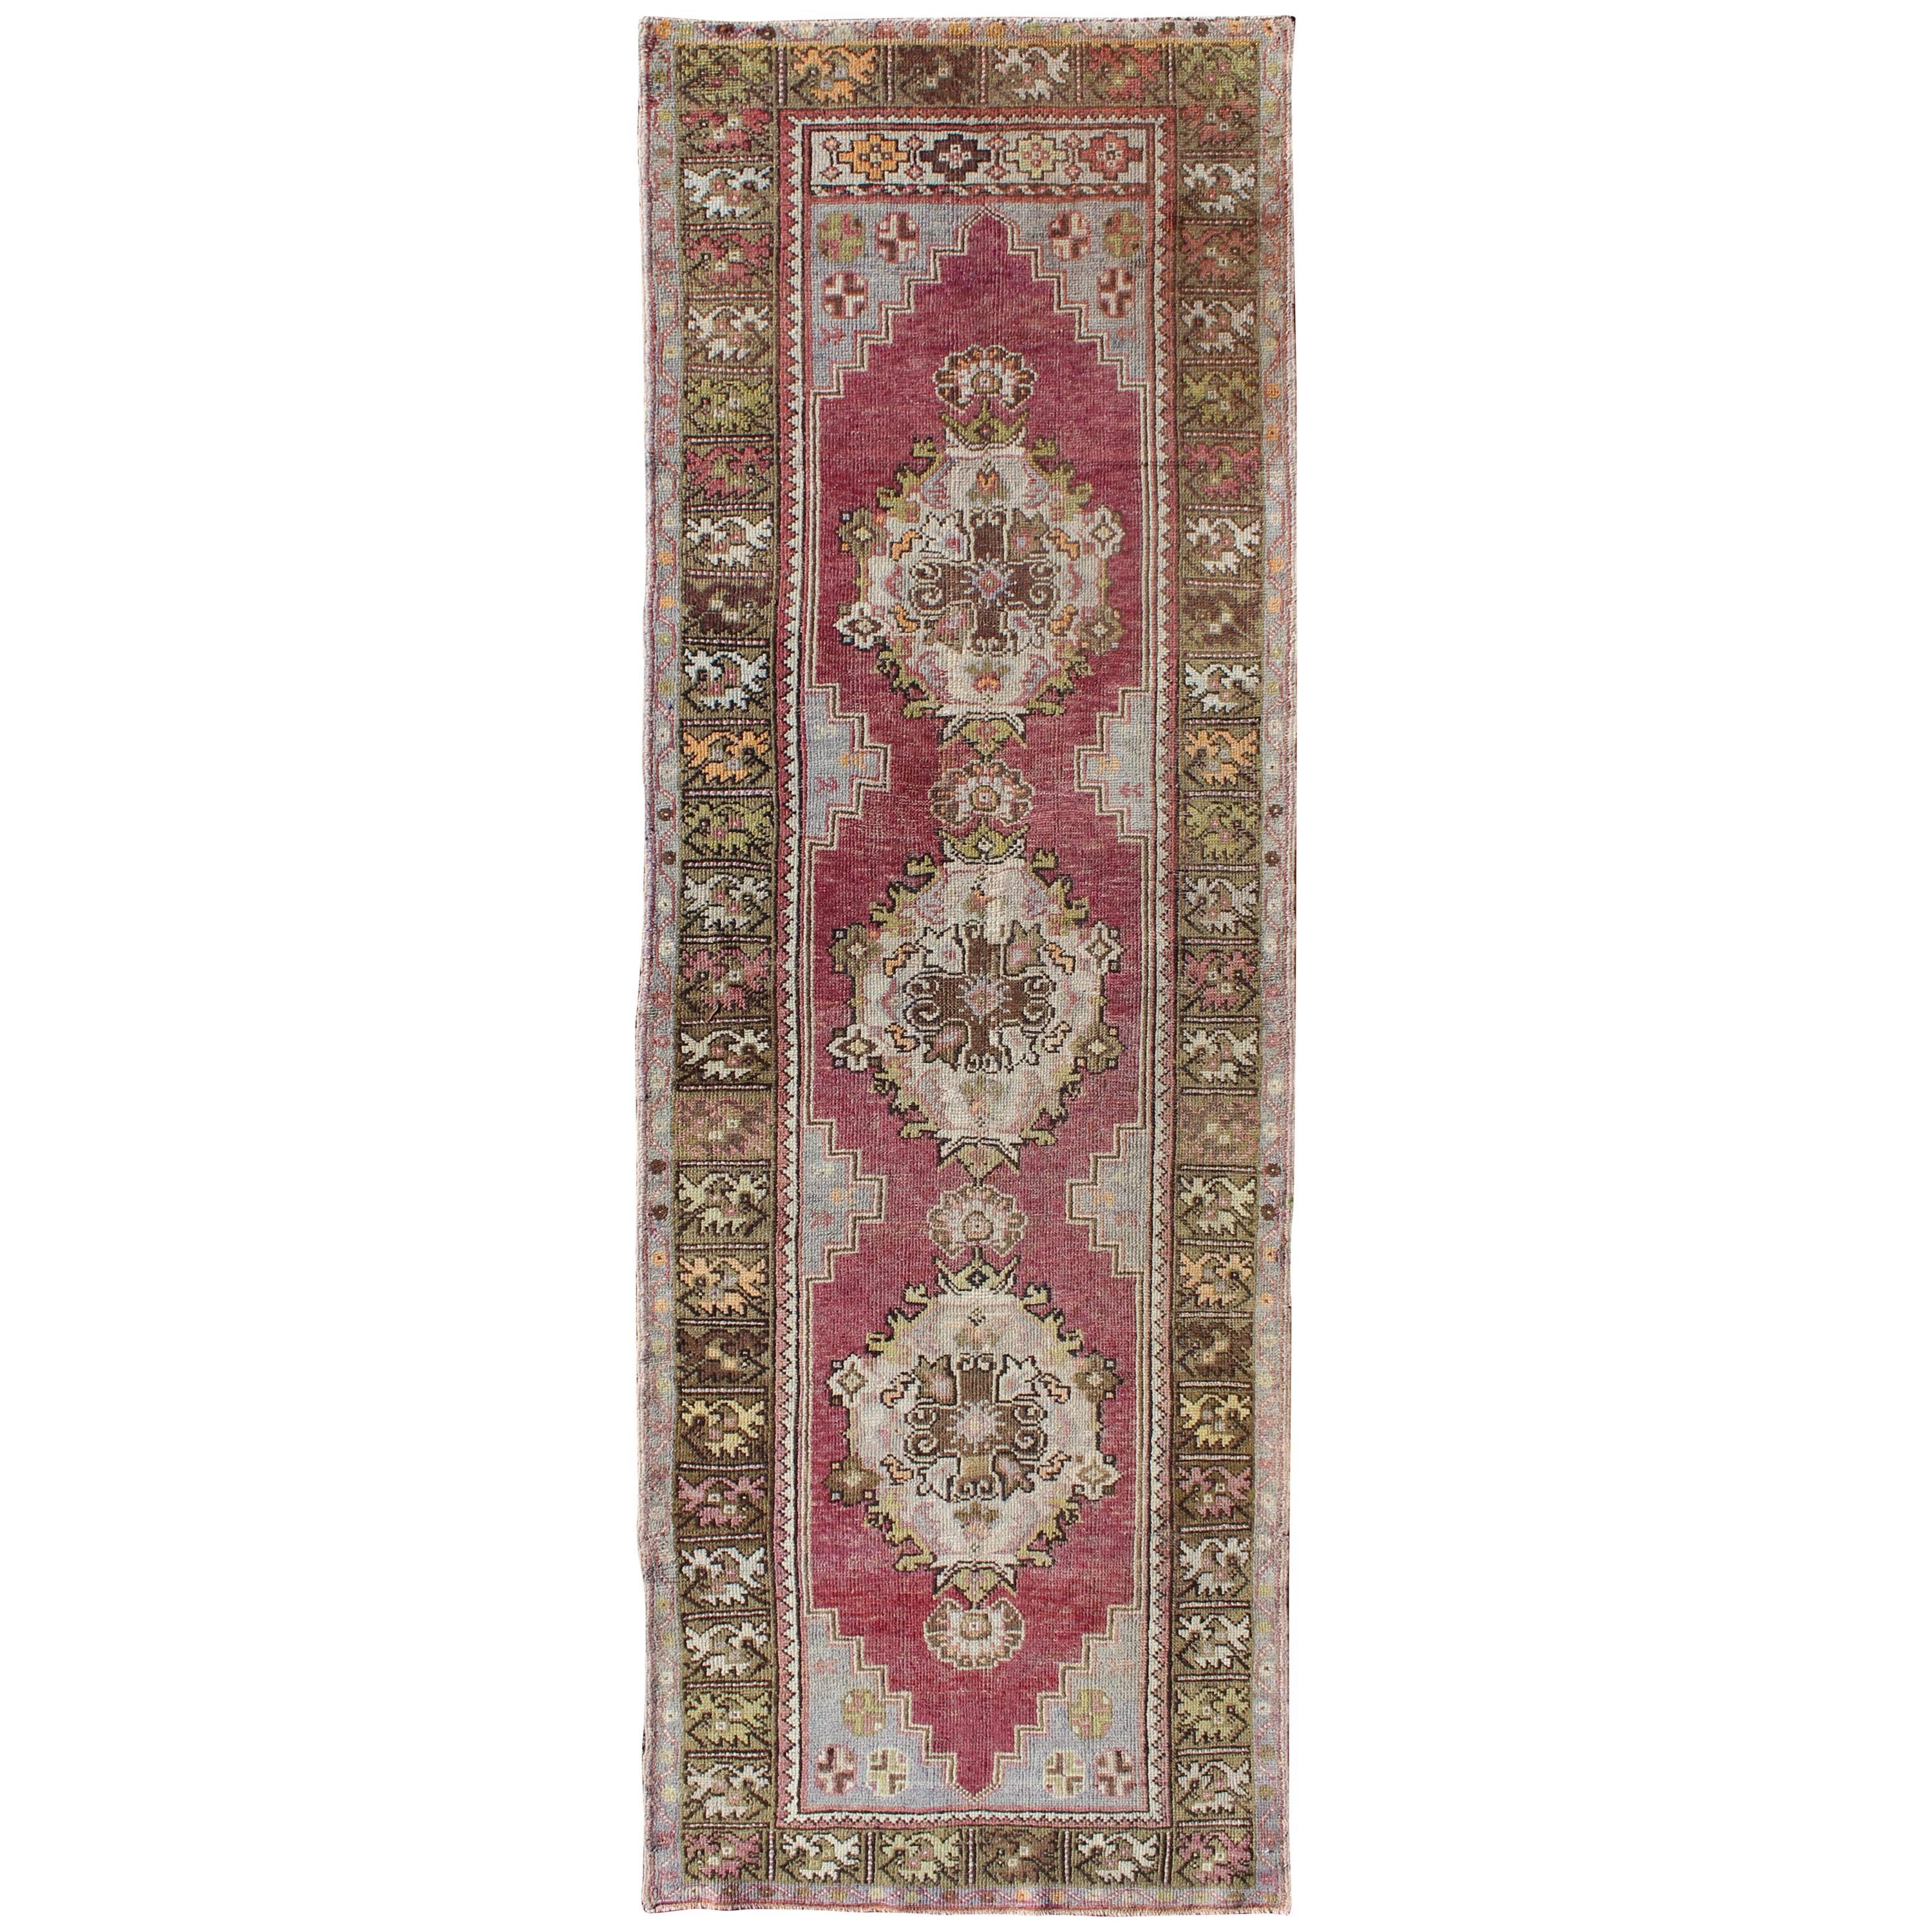 Berry Tri-Medallion Vintage Turkey Oushak Runner with Gray, Camel, Blush Accents For Sale